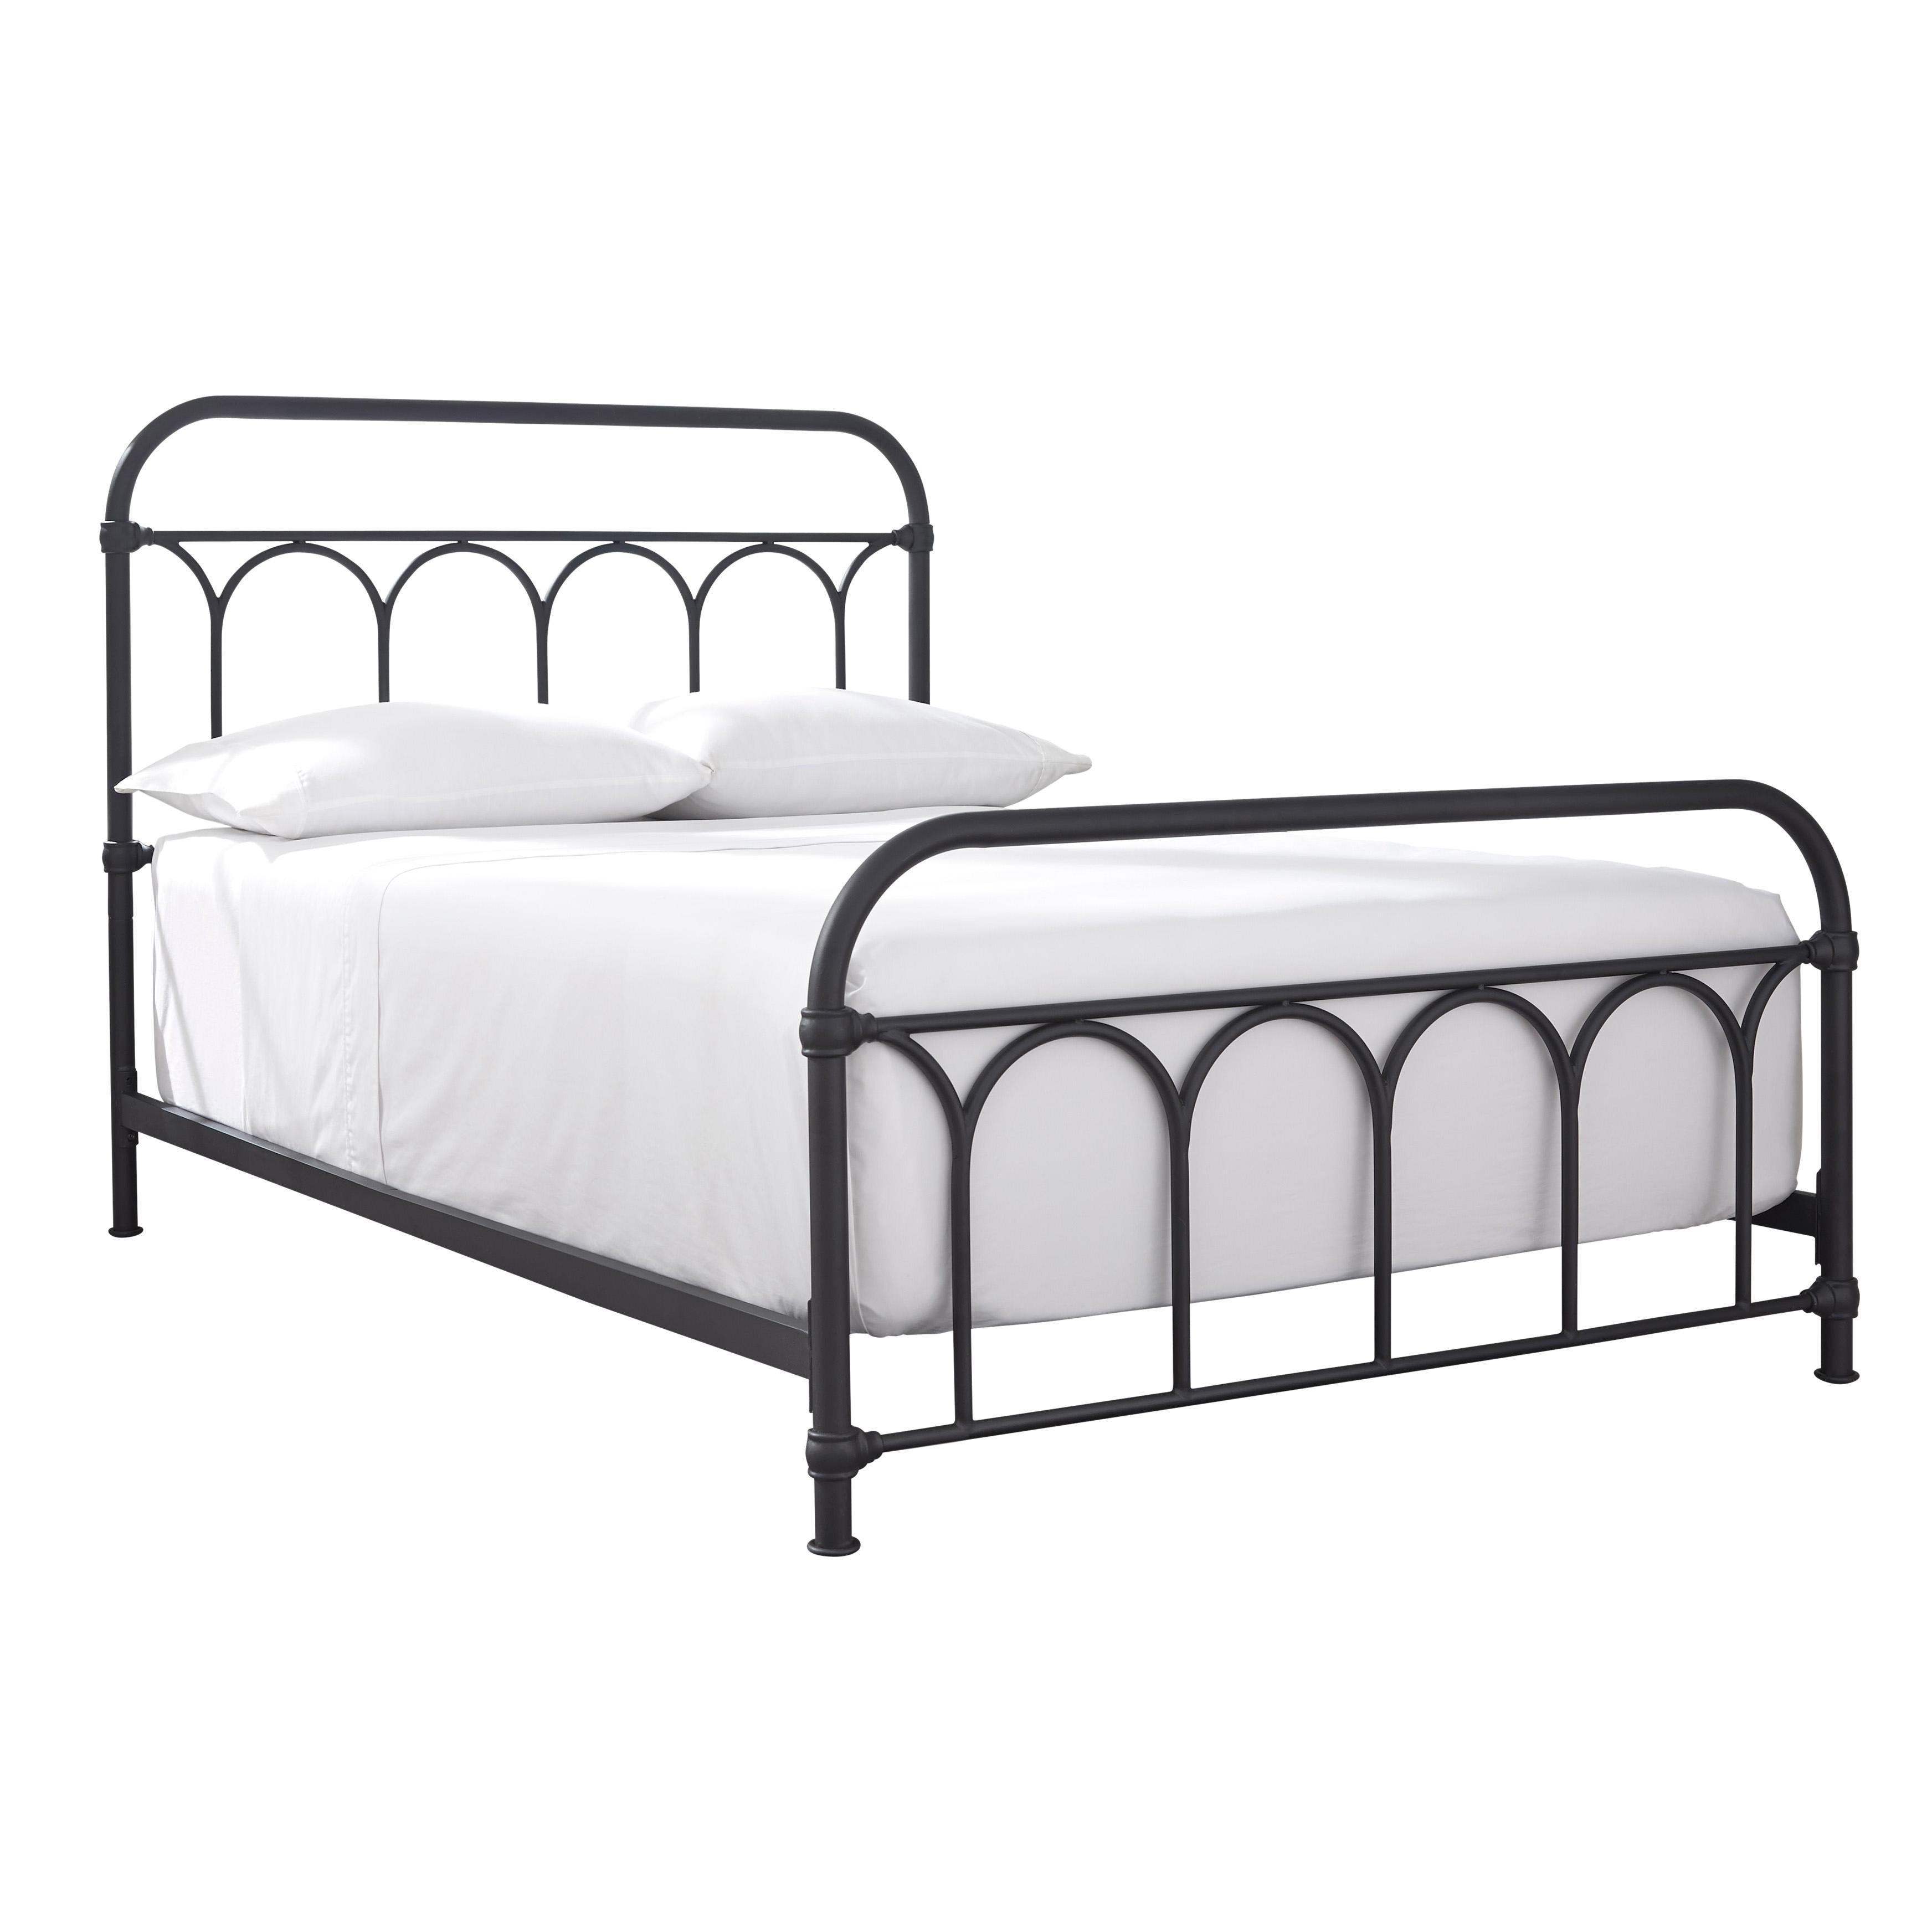 Signature Design by Ashley Nashburg Queen Metal Bed B280-681